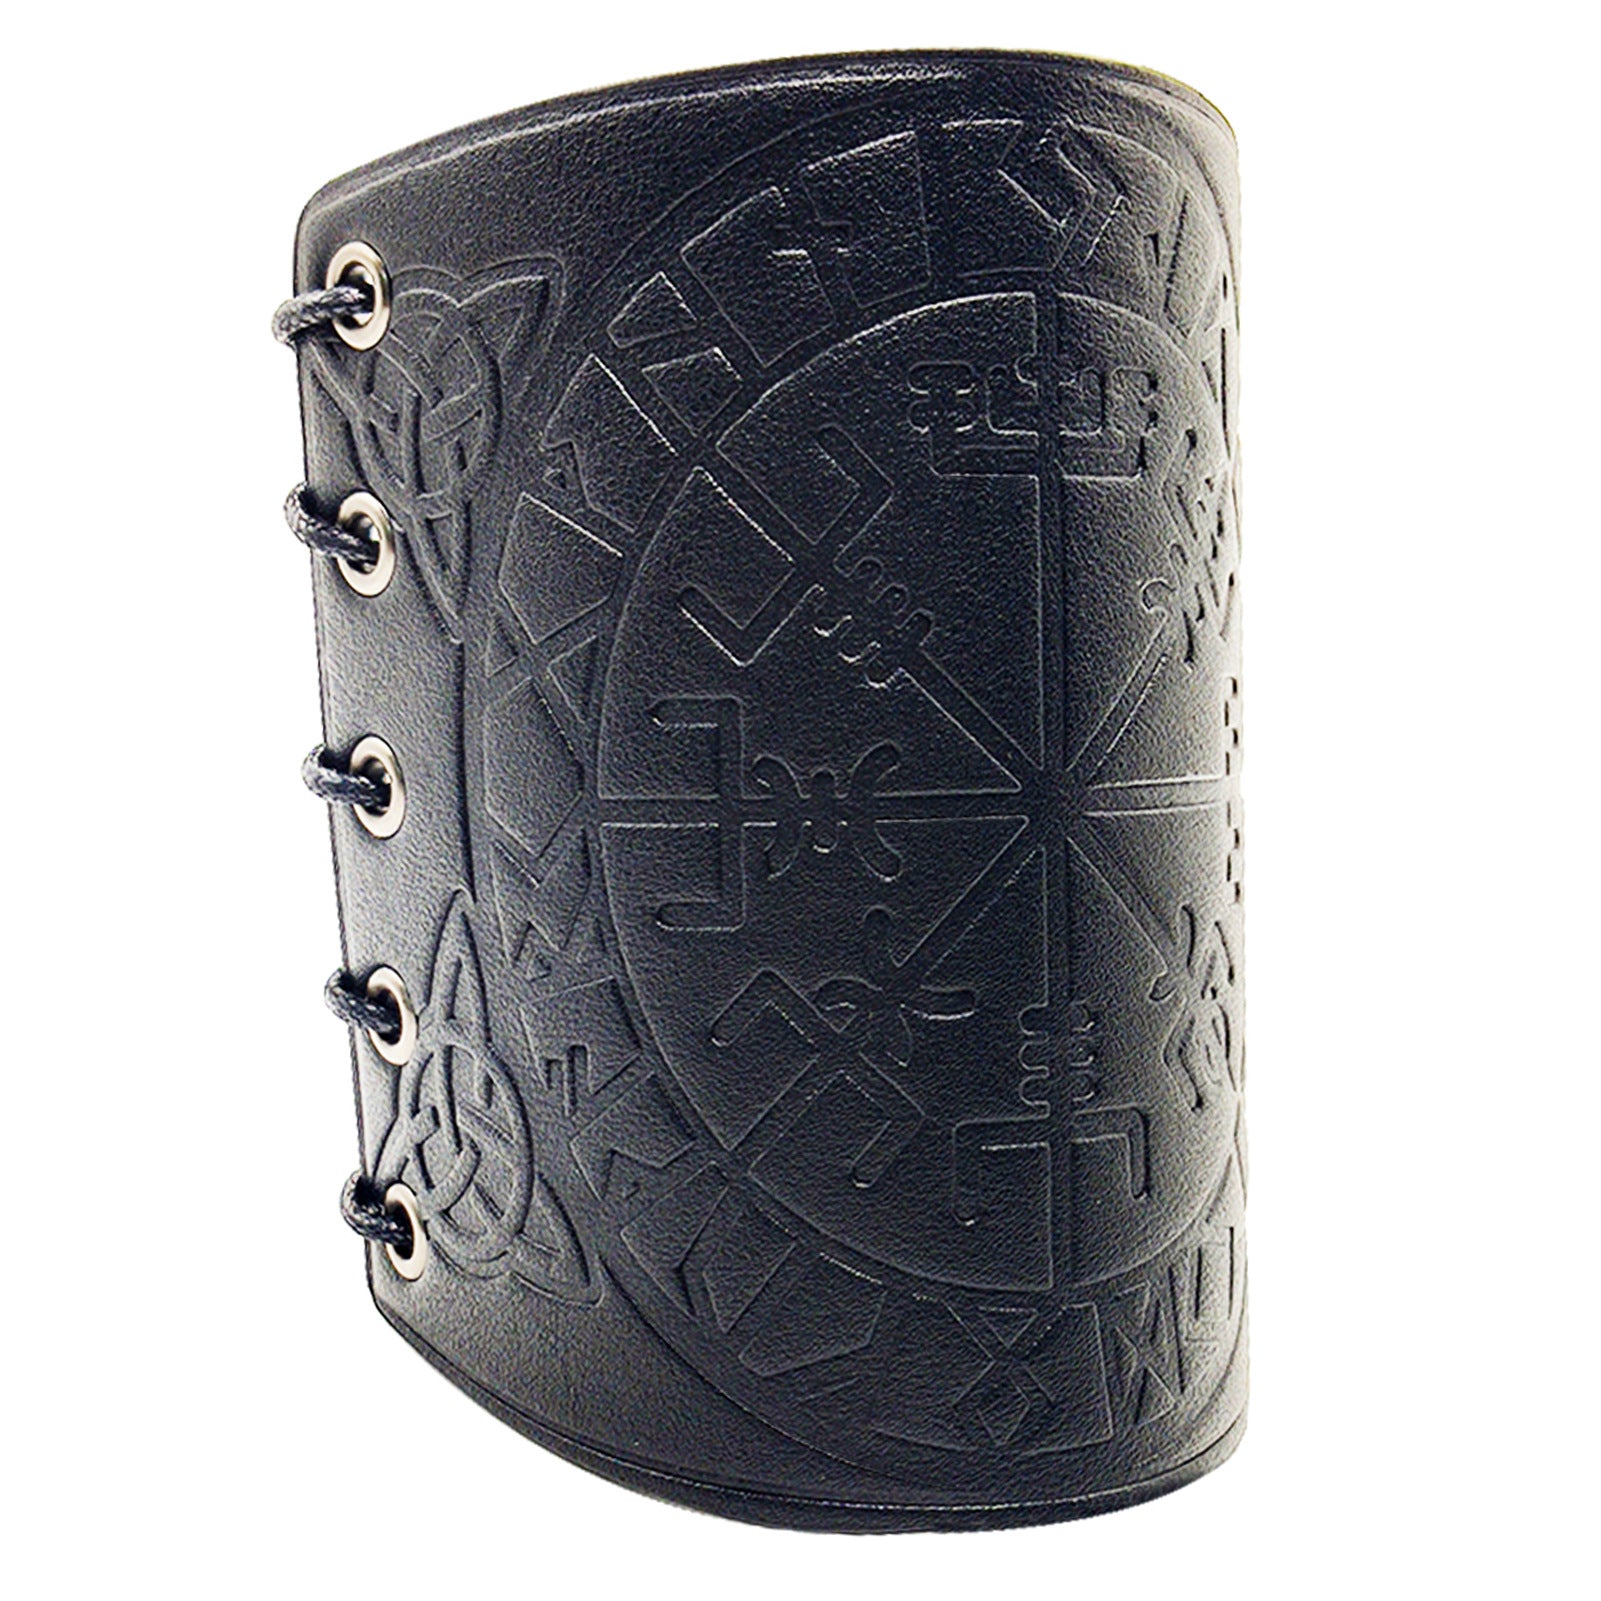 Wristband of Giants Strength Medieval Renaissance COSPLAY PropsGiants Strength Medieval Renaissance COSPLAY Props
 Product information:
 
 Applicable age group: Adult
 
 Color: Black S00001, Brown S00002, khaki S00003
 
 Material: PU
 
 Scene: Daily wear, game parties, rock gatDungeonDice1